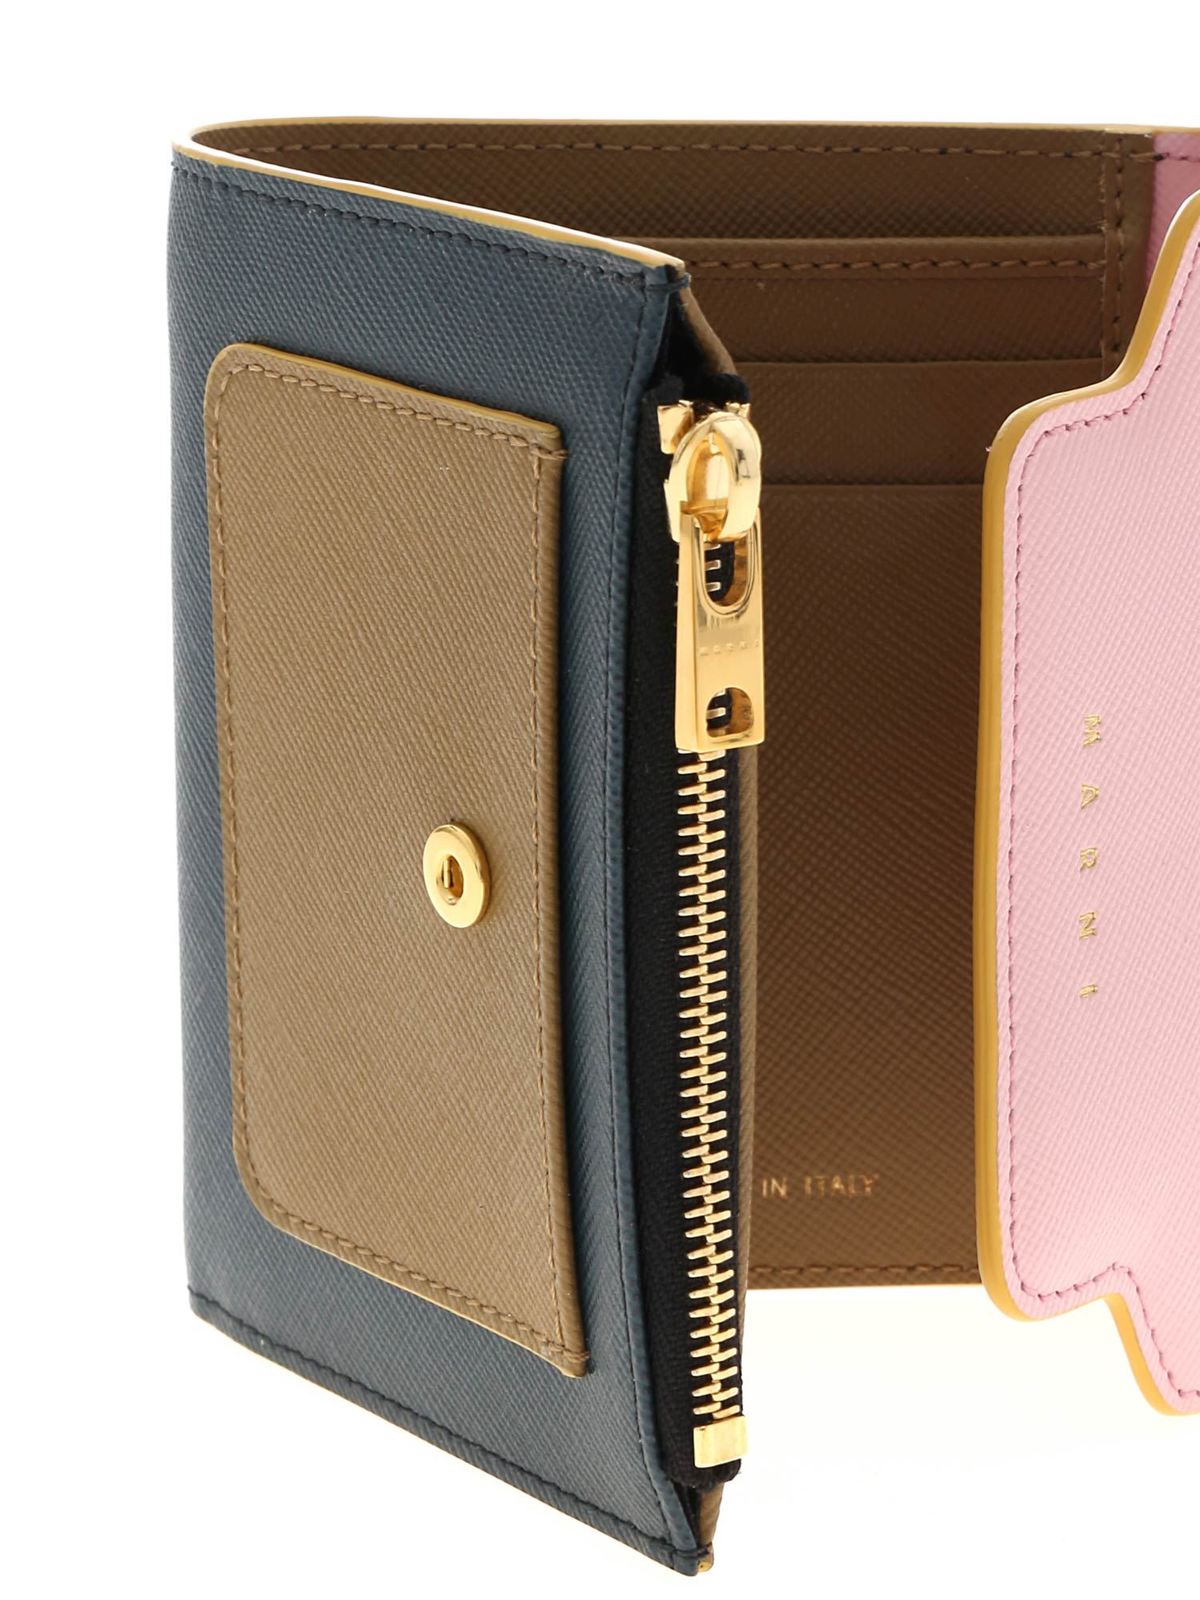 Wallets & purses Marni - Trifold wallet in teal blue and pink